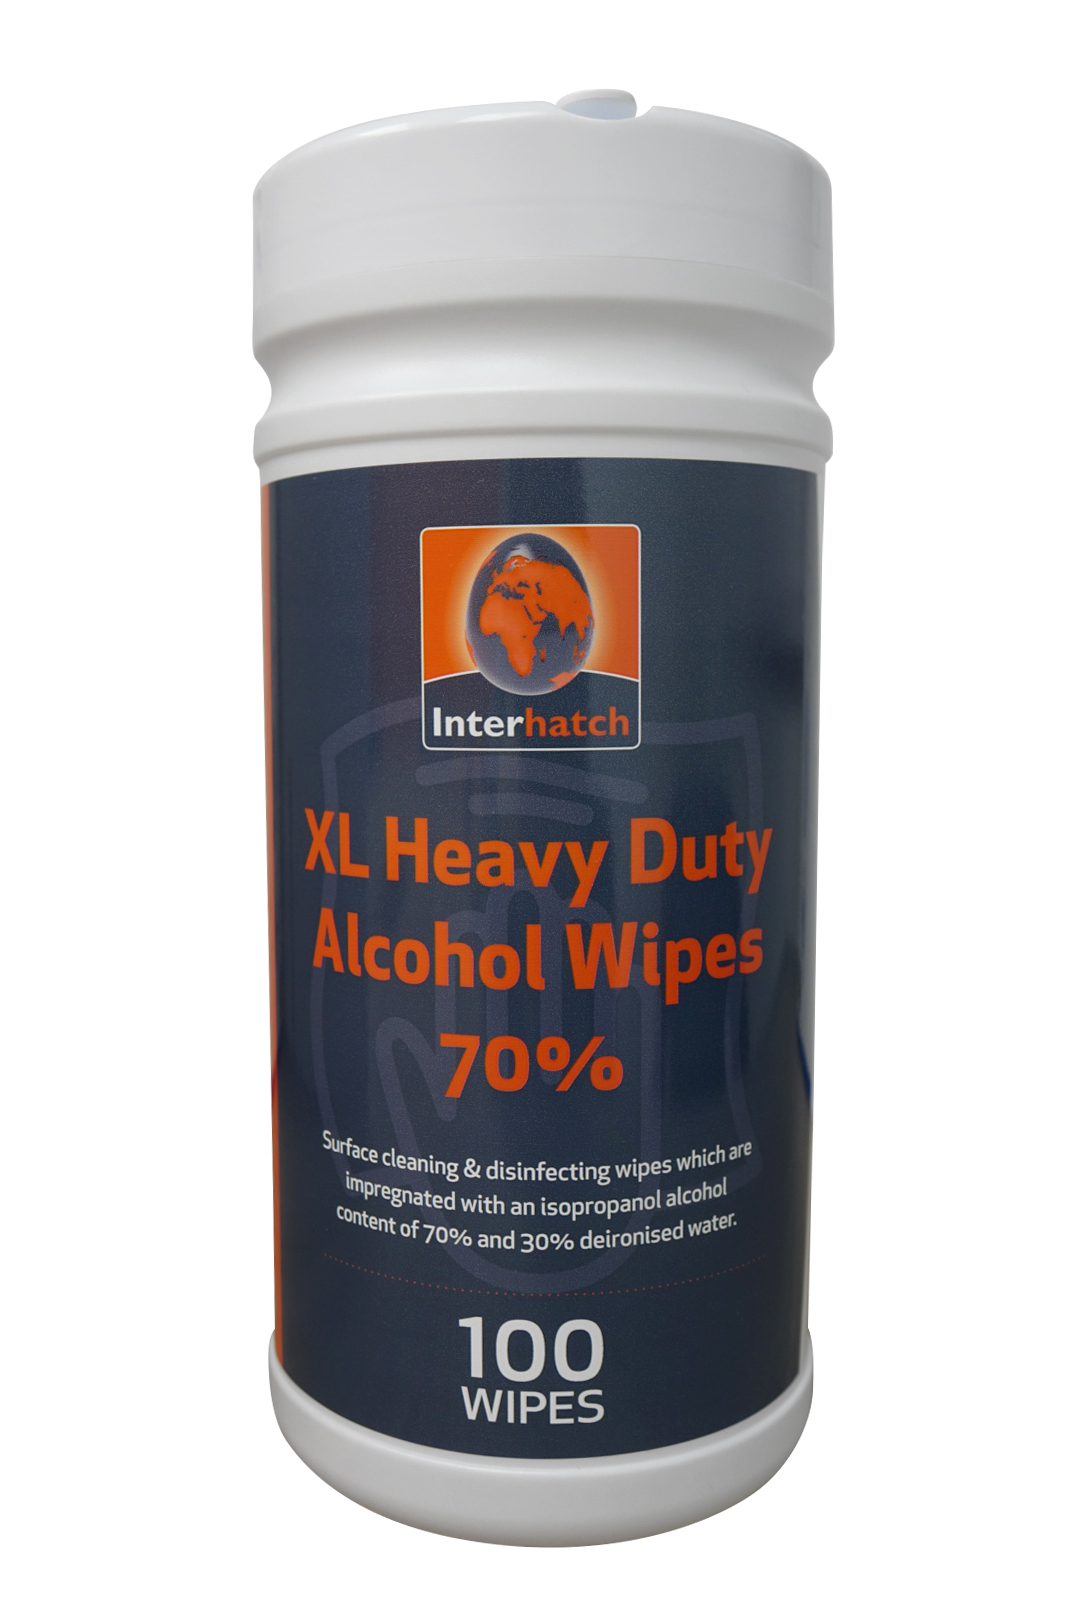 XL Heavy Duty Alcohol Wipes 70% - Pack of 100